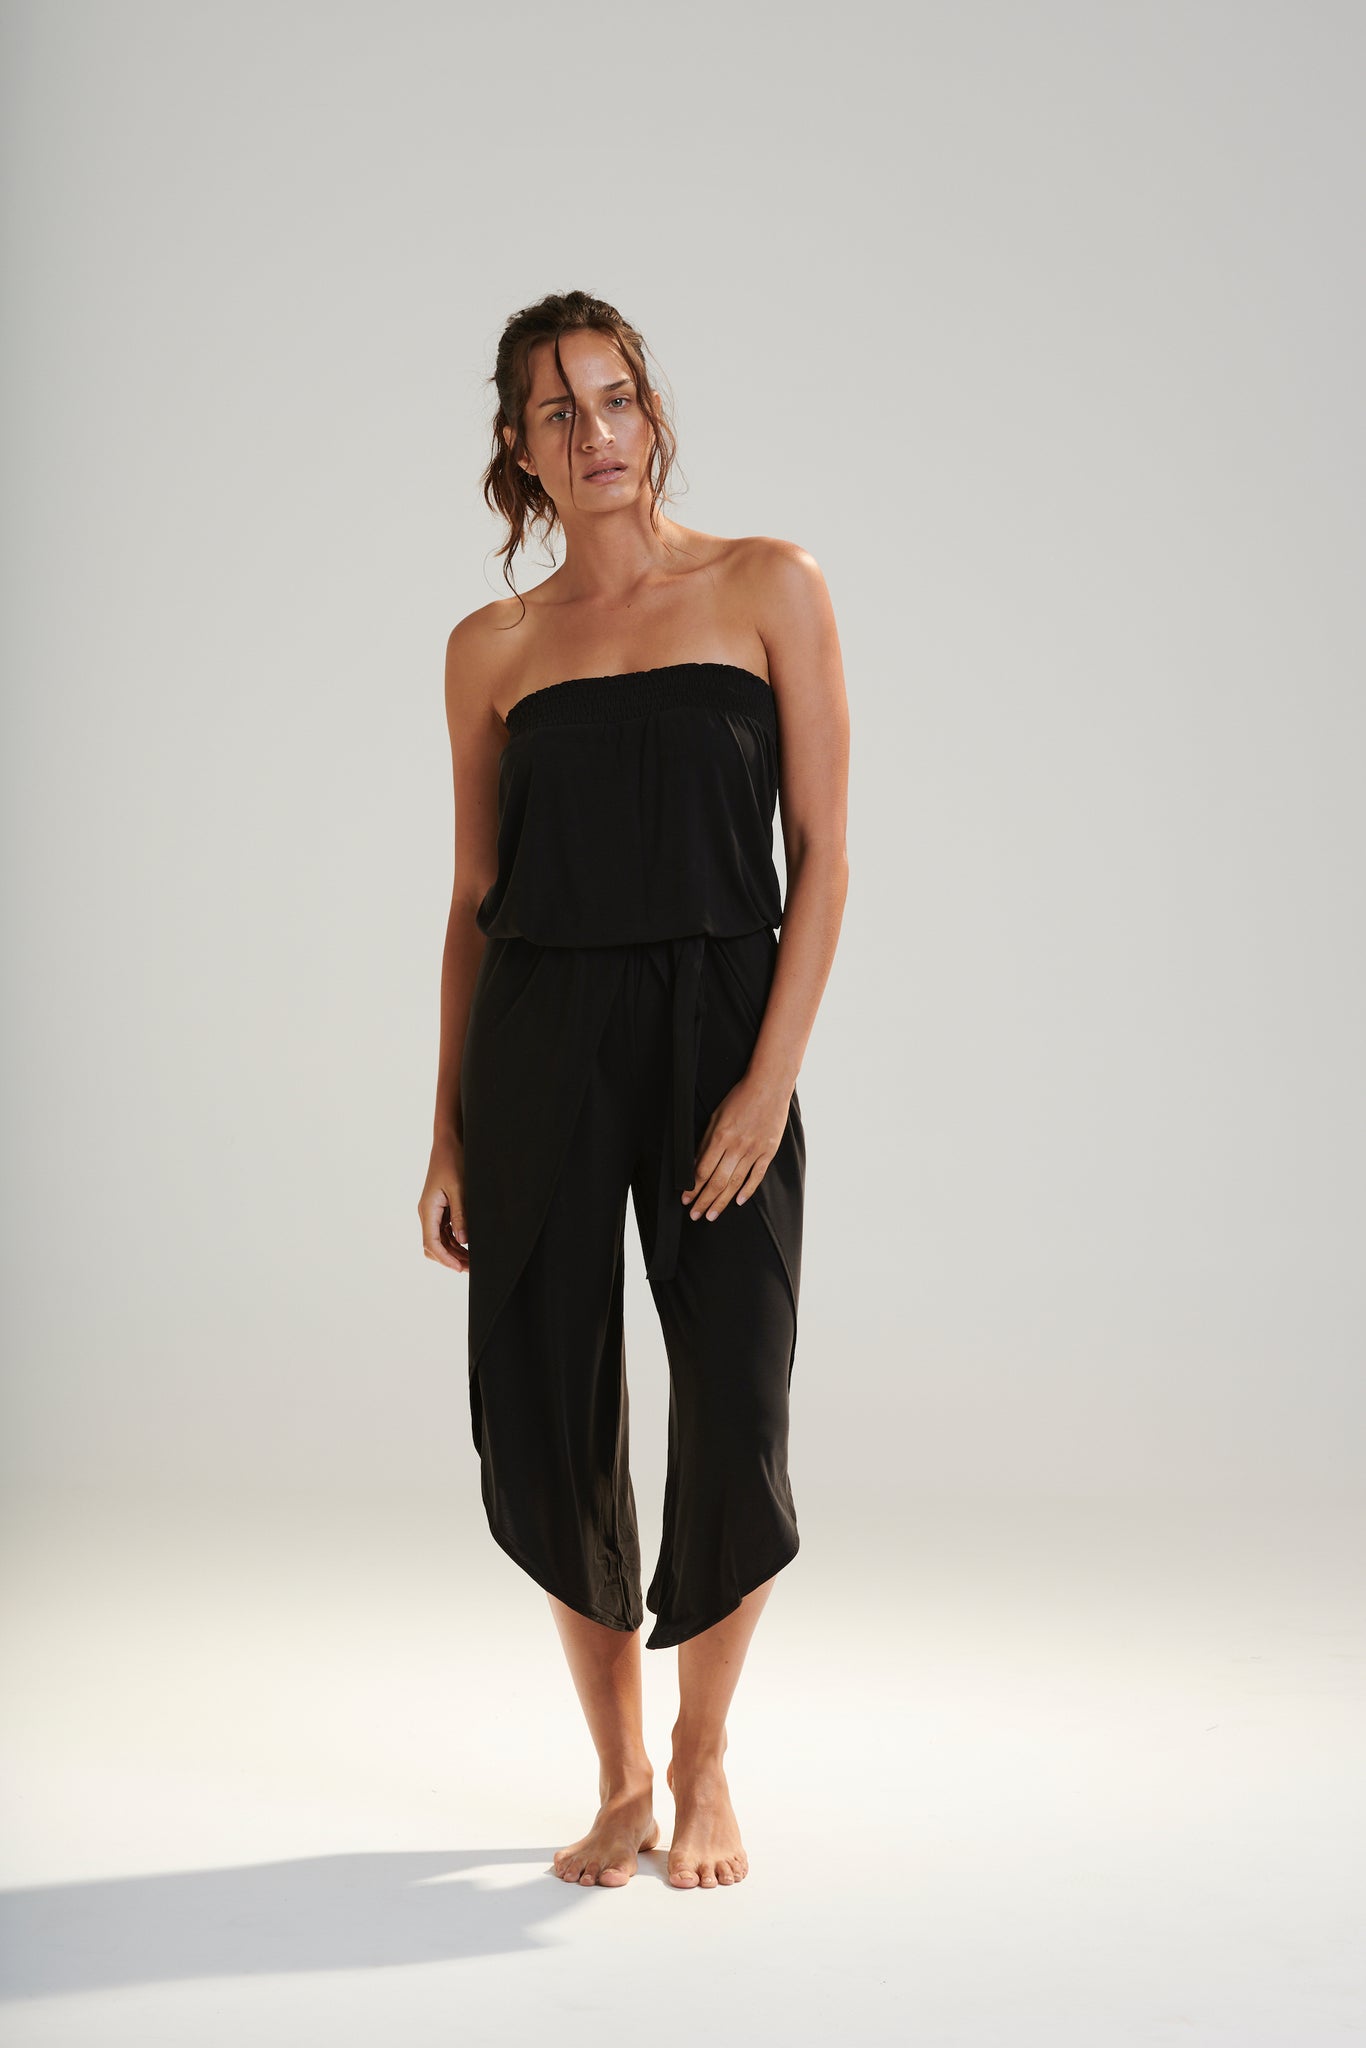 FREYA JUMPSUIT BEECHWOOD MODAL JERSEY SHIRRED BODICE AND PETAL WRAP LEG WITH ELASTIC WAIST AND REMOVABLE TIE IN DARK WASHED BLACK FRONT VIEW